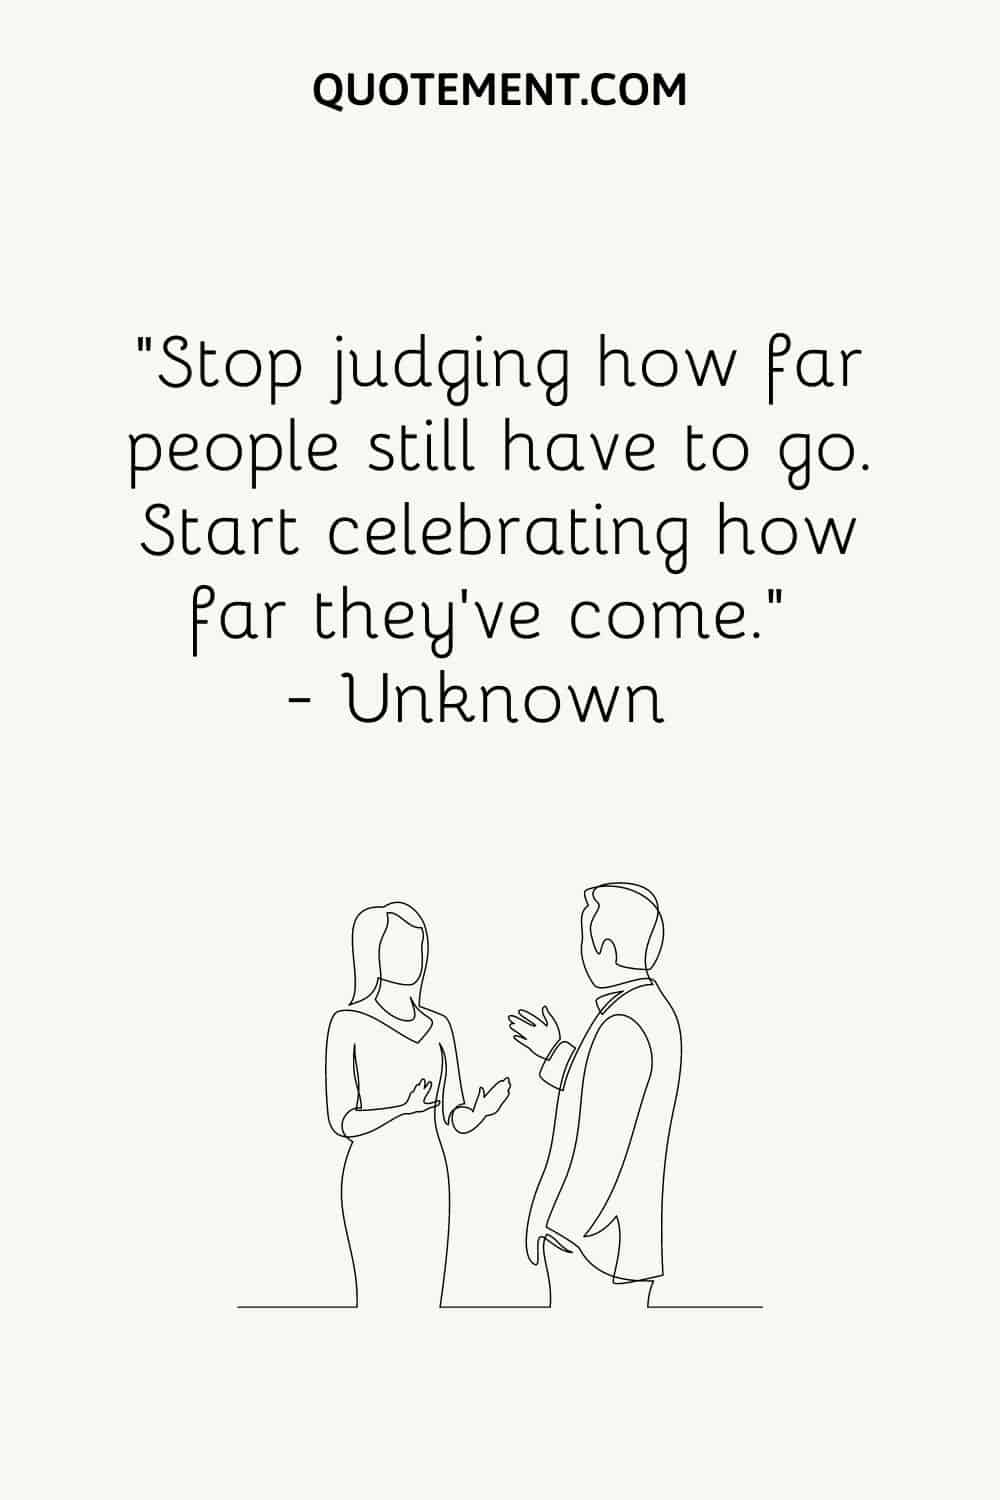 “Stop judging how far people still have to go. Start celebrating how far they’ve come.” — Unknown